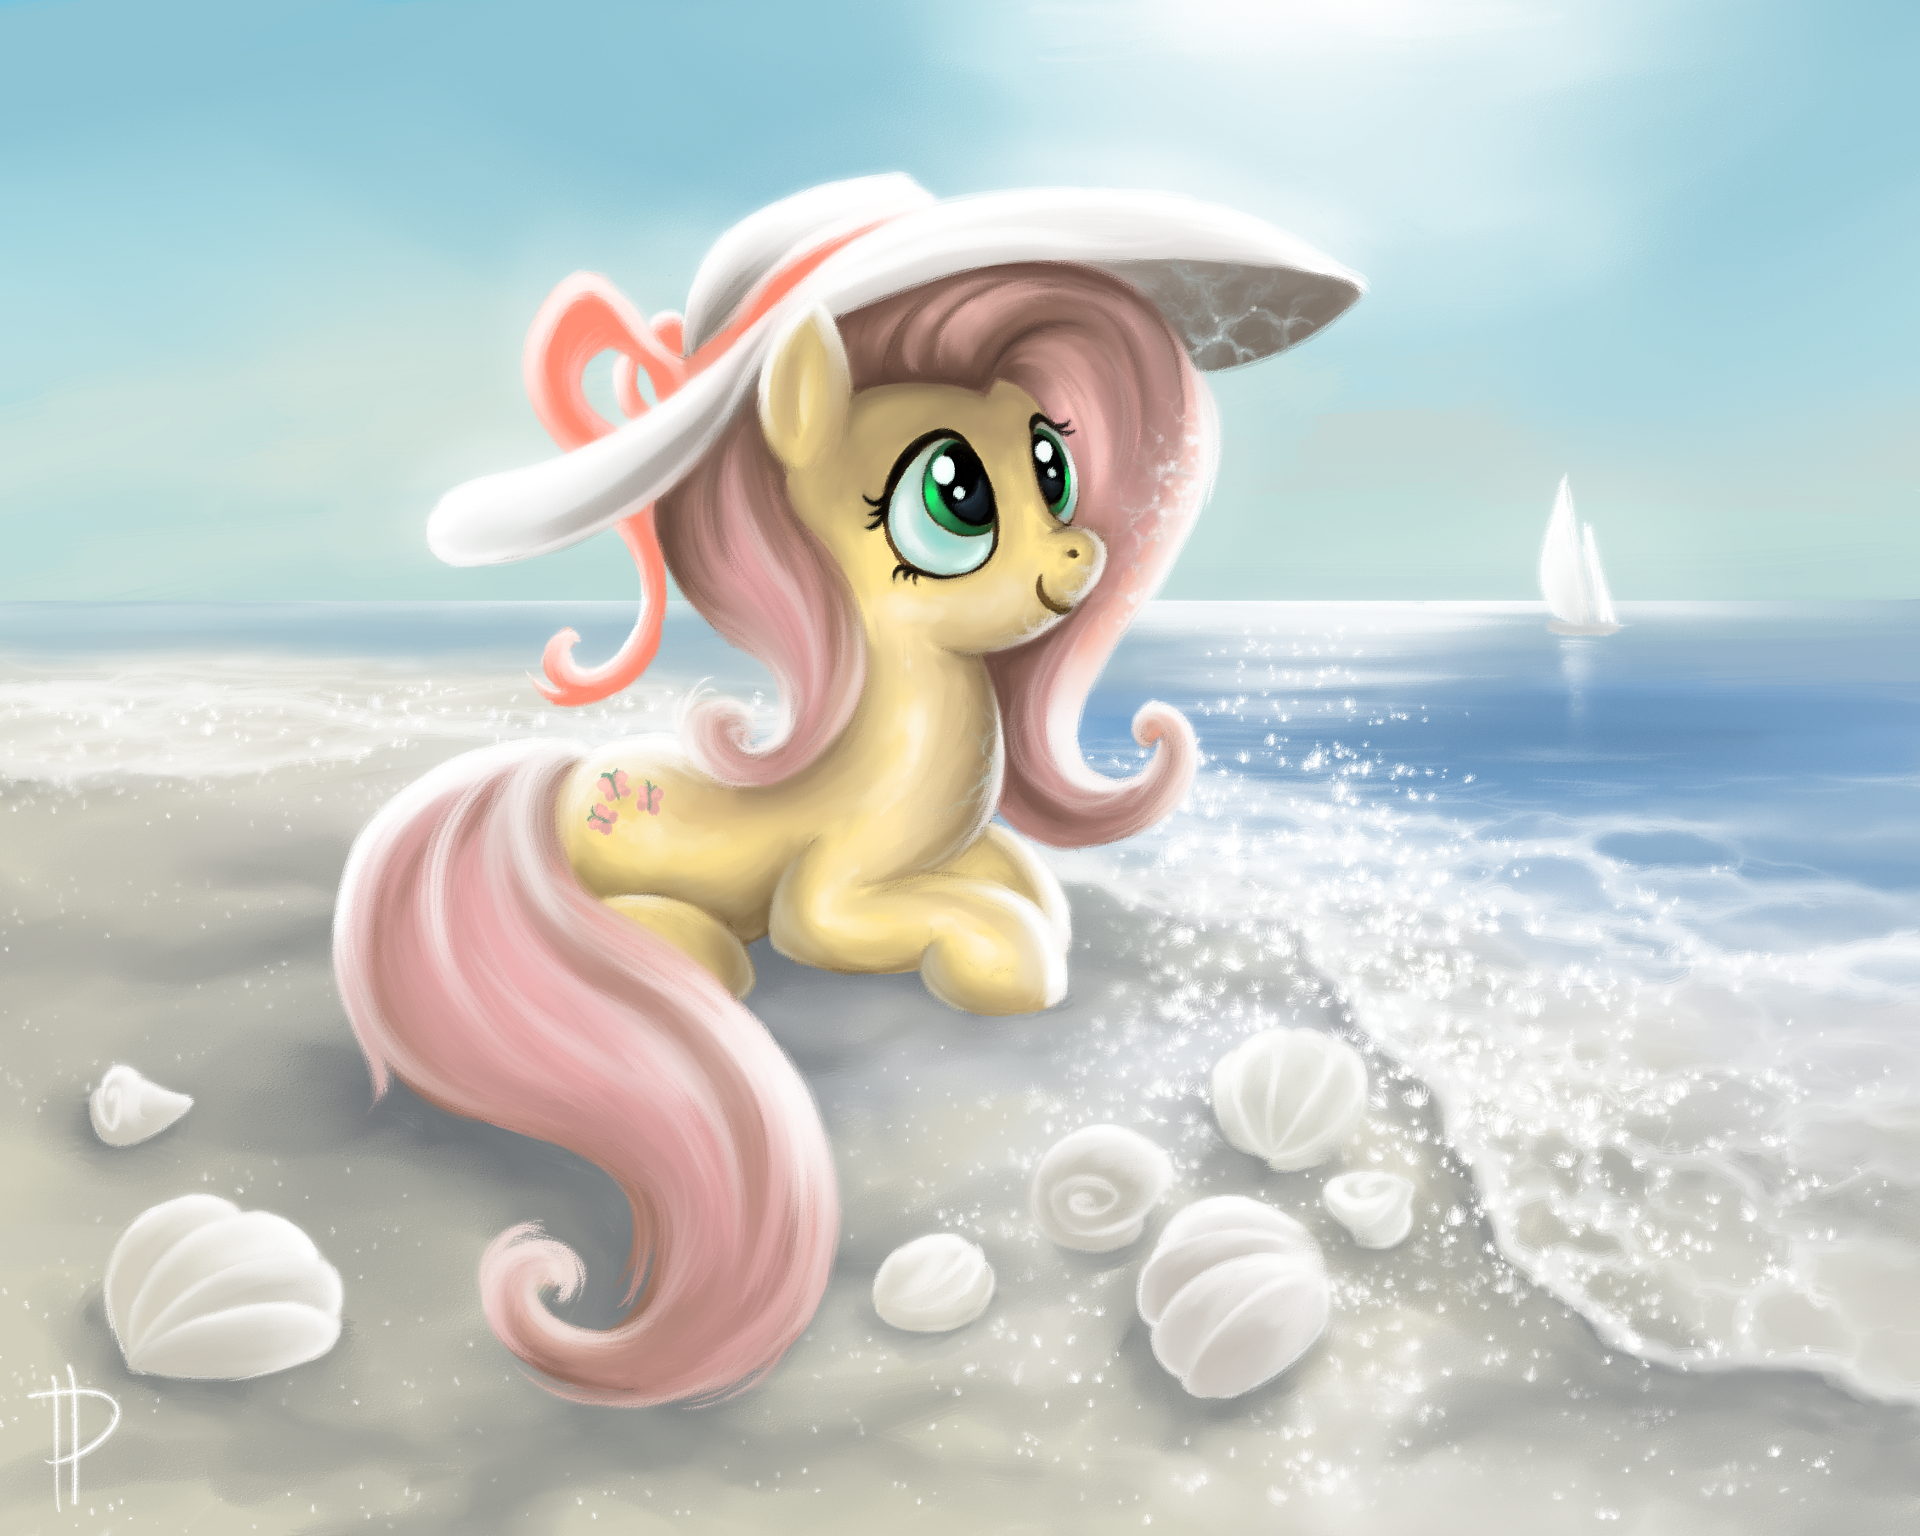 Light and breeze by Rom-Art